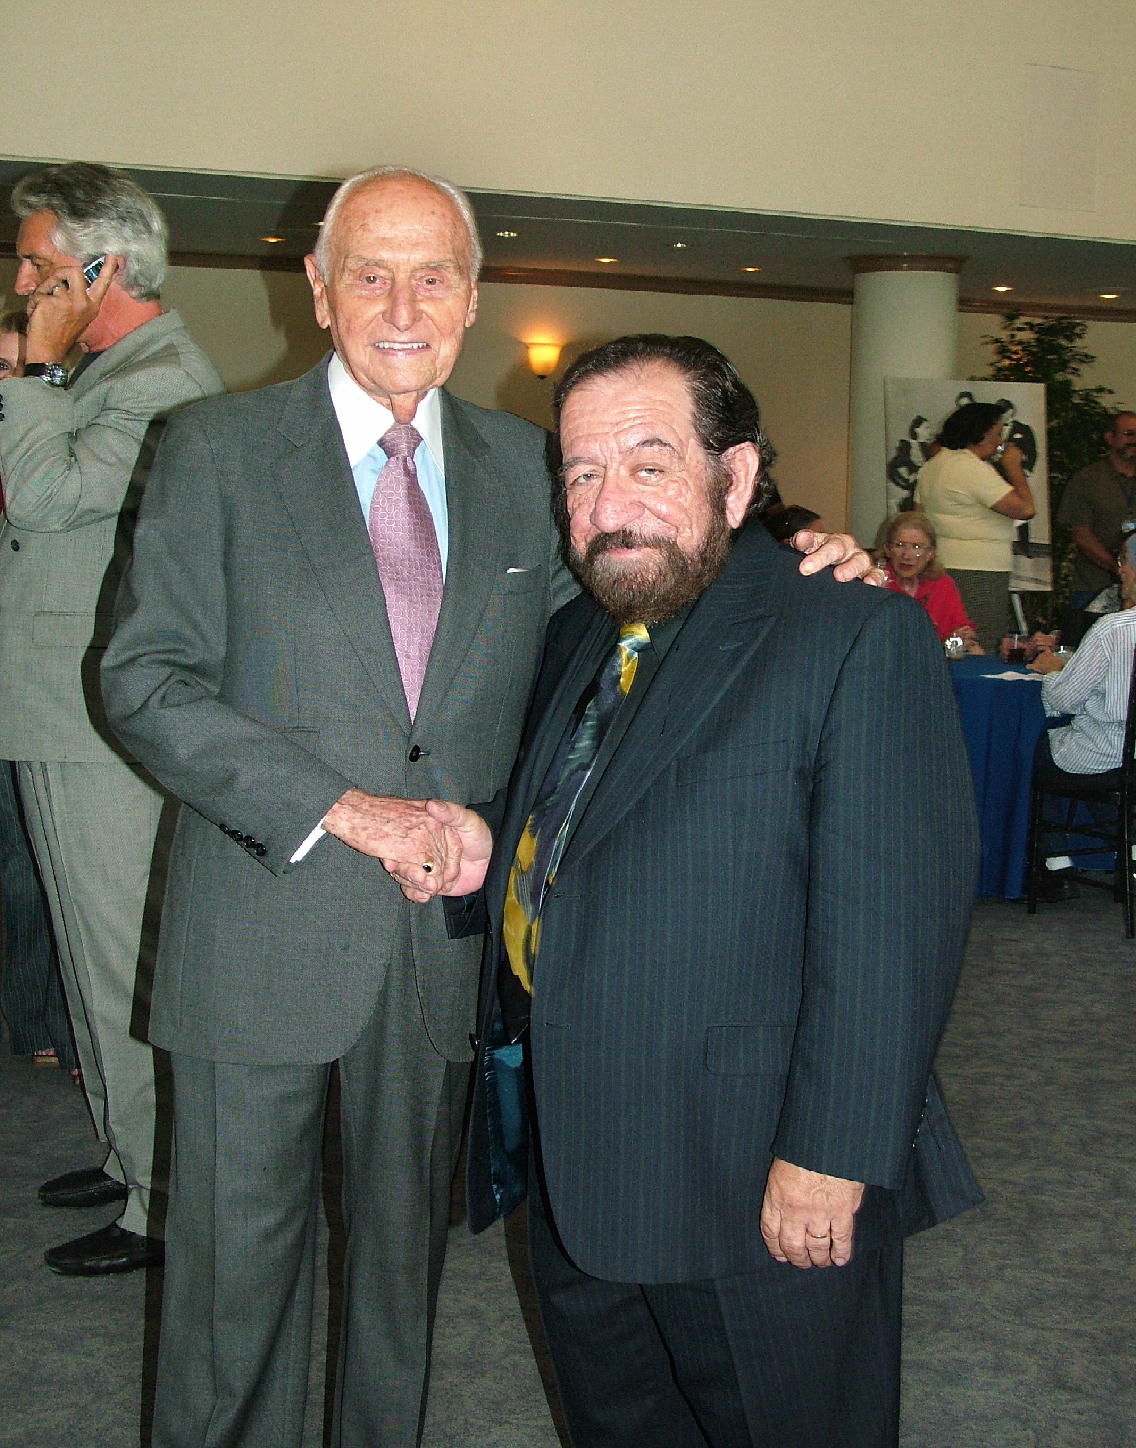 Jesse with A.C. Lyles at Paramount Pictures celebrating A.C.'s anniversary and birthday. 2008